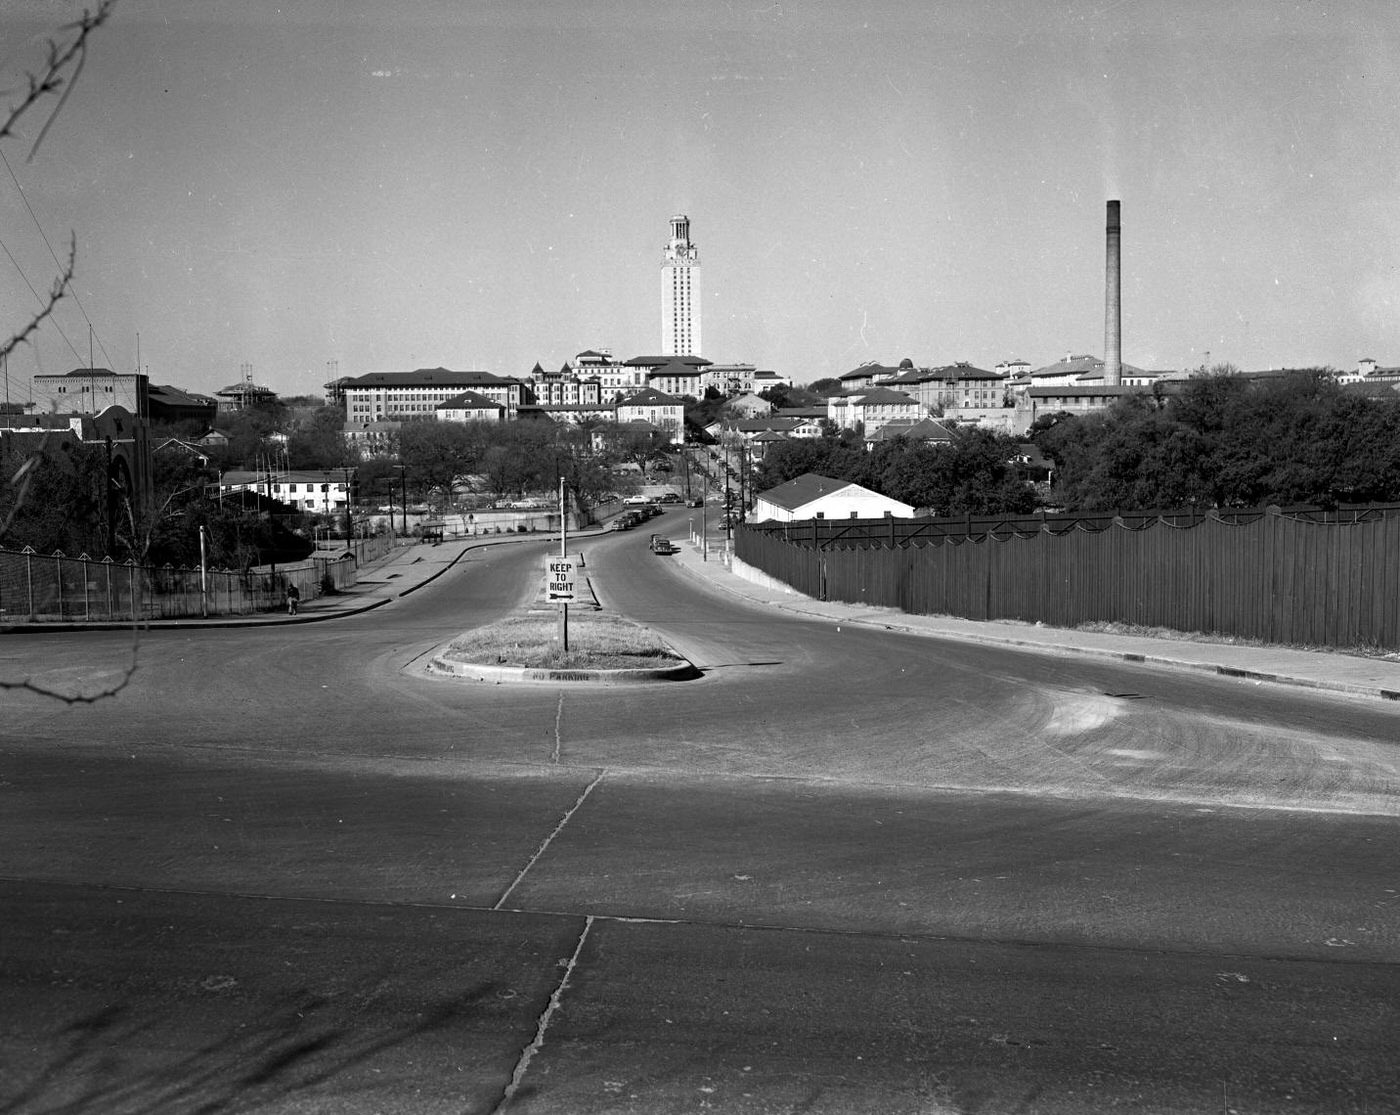 Construction Fencing at the University of Texas at Austin, 1951